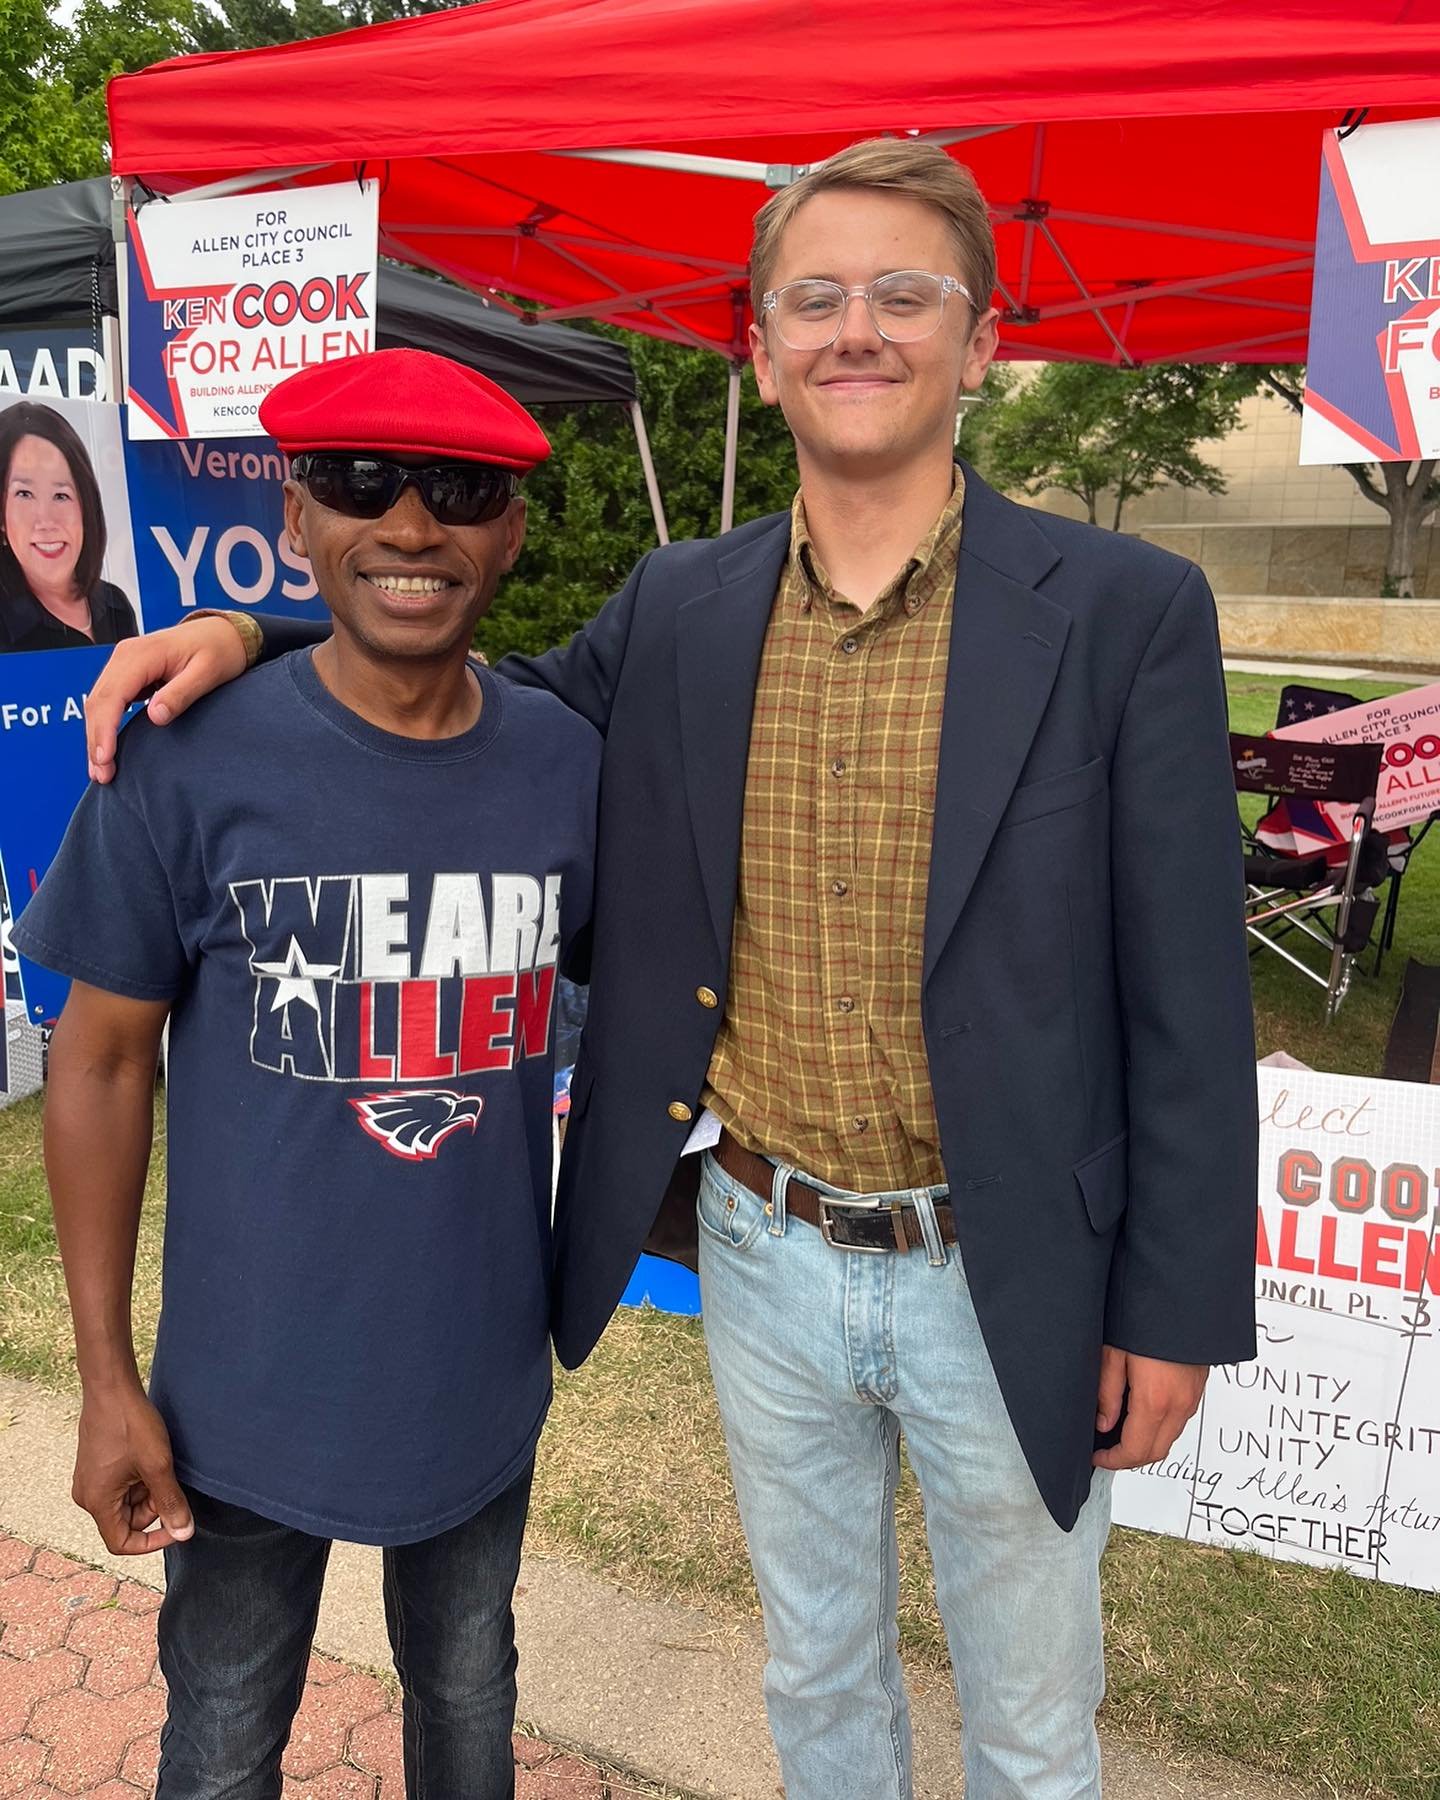 Happy to stop by the polls and support the real difference makers. I will be rooting for Ken Cook for Allen City Council 3, Keith Maddox for Frisco ISD Place 7 and John Holley for Allen ISD Place 3. Thank you for stepping up!